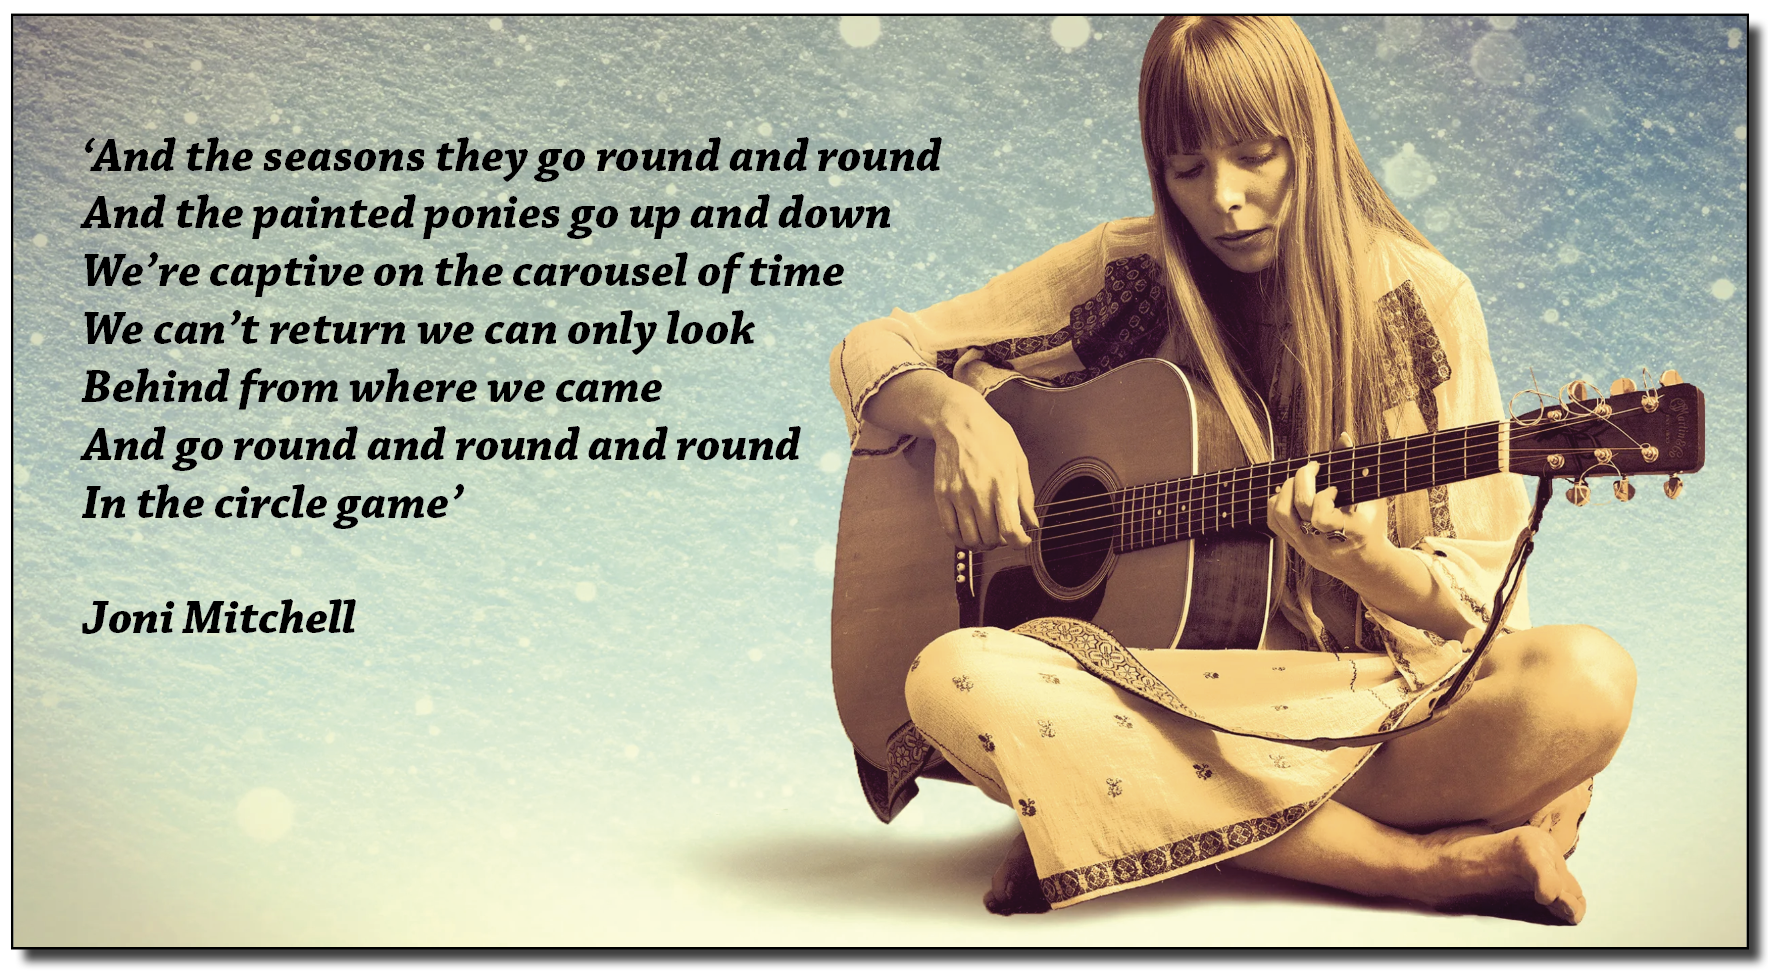 ‘And the seasons they go round and round
And the painted ponies go up and down
We’re captive on the carousel of time
We can’t return we can only look
Behind from where we came

And go round and round and round
In the circle game’

 

  

Joni Mitchell